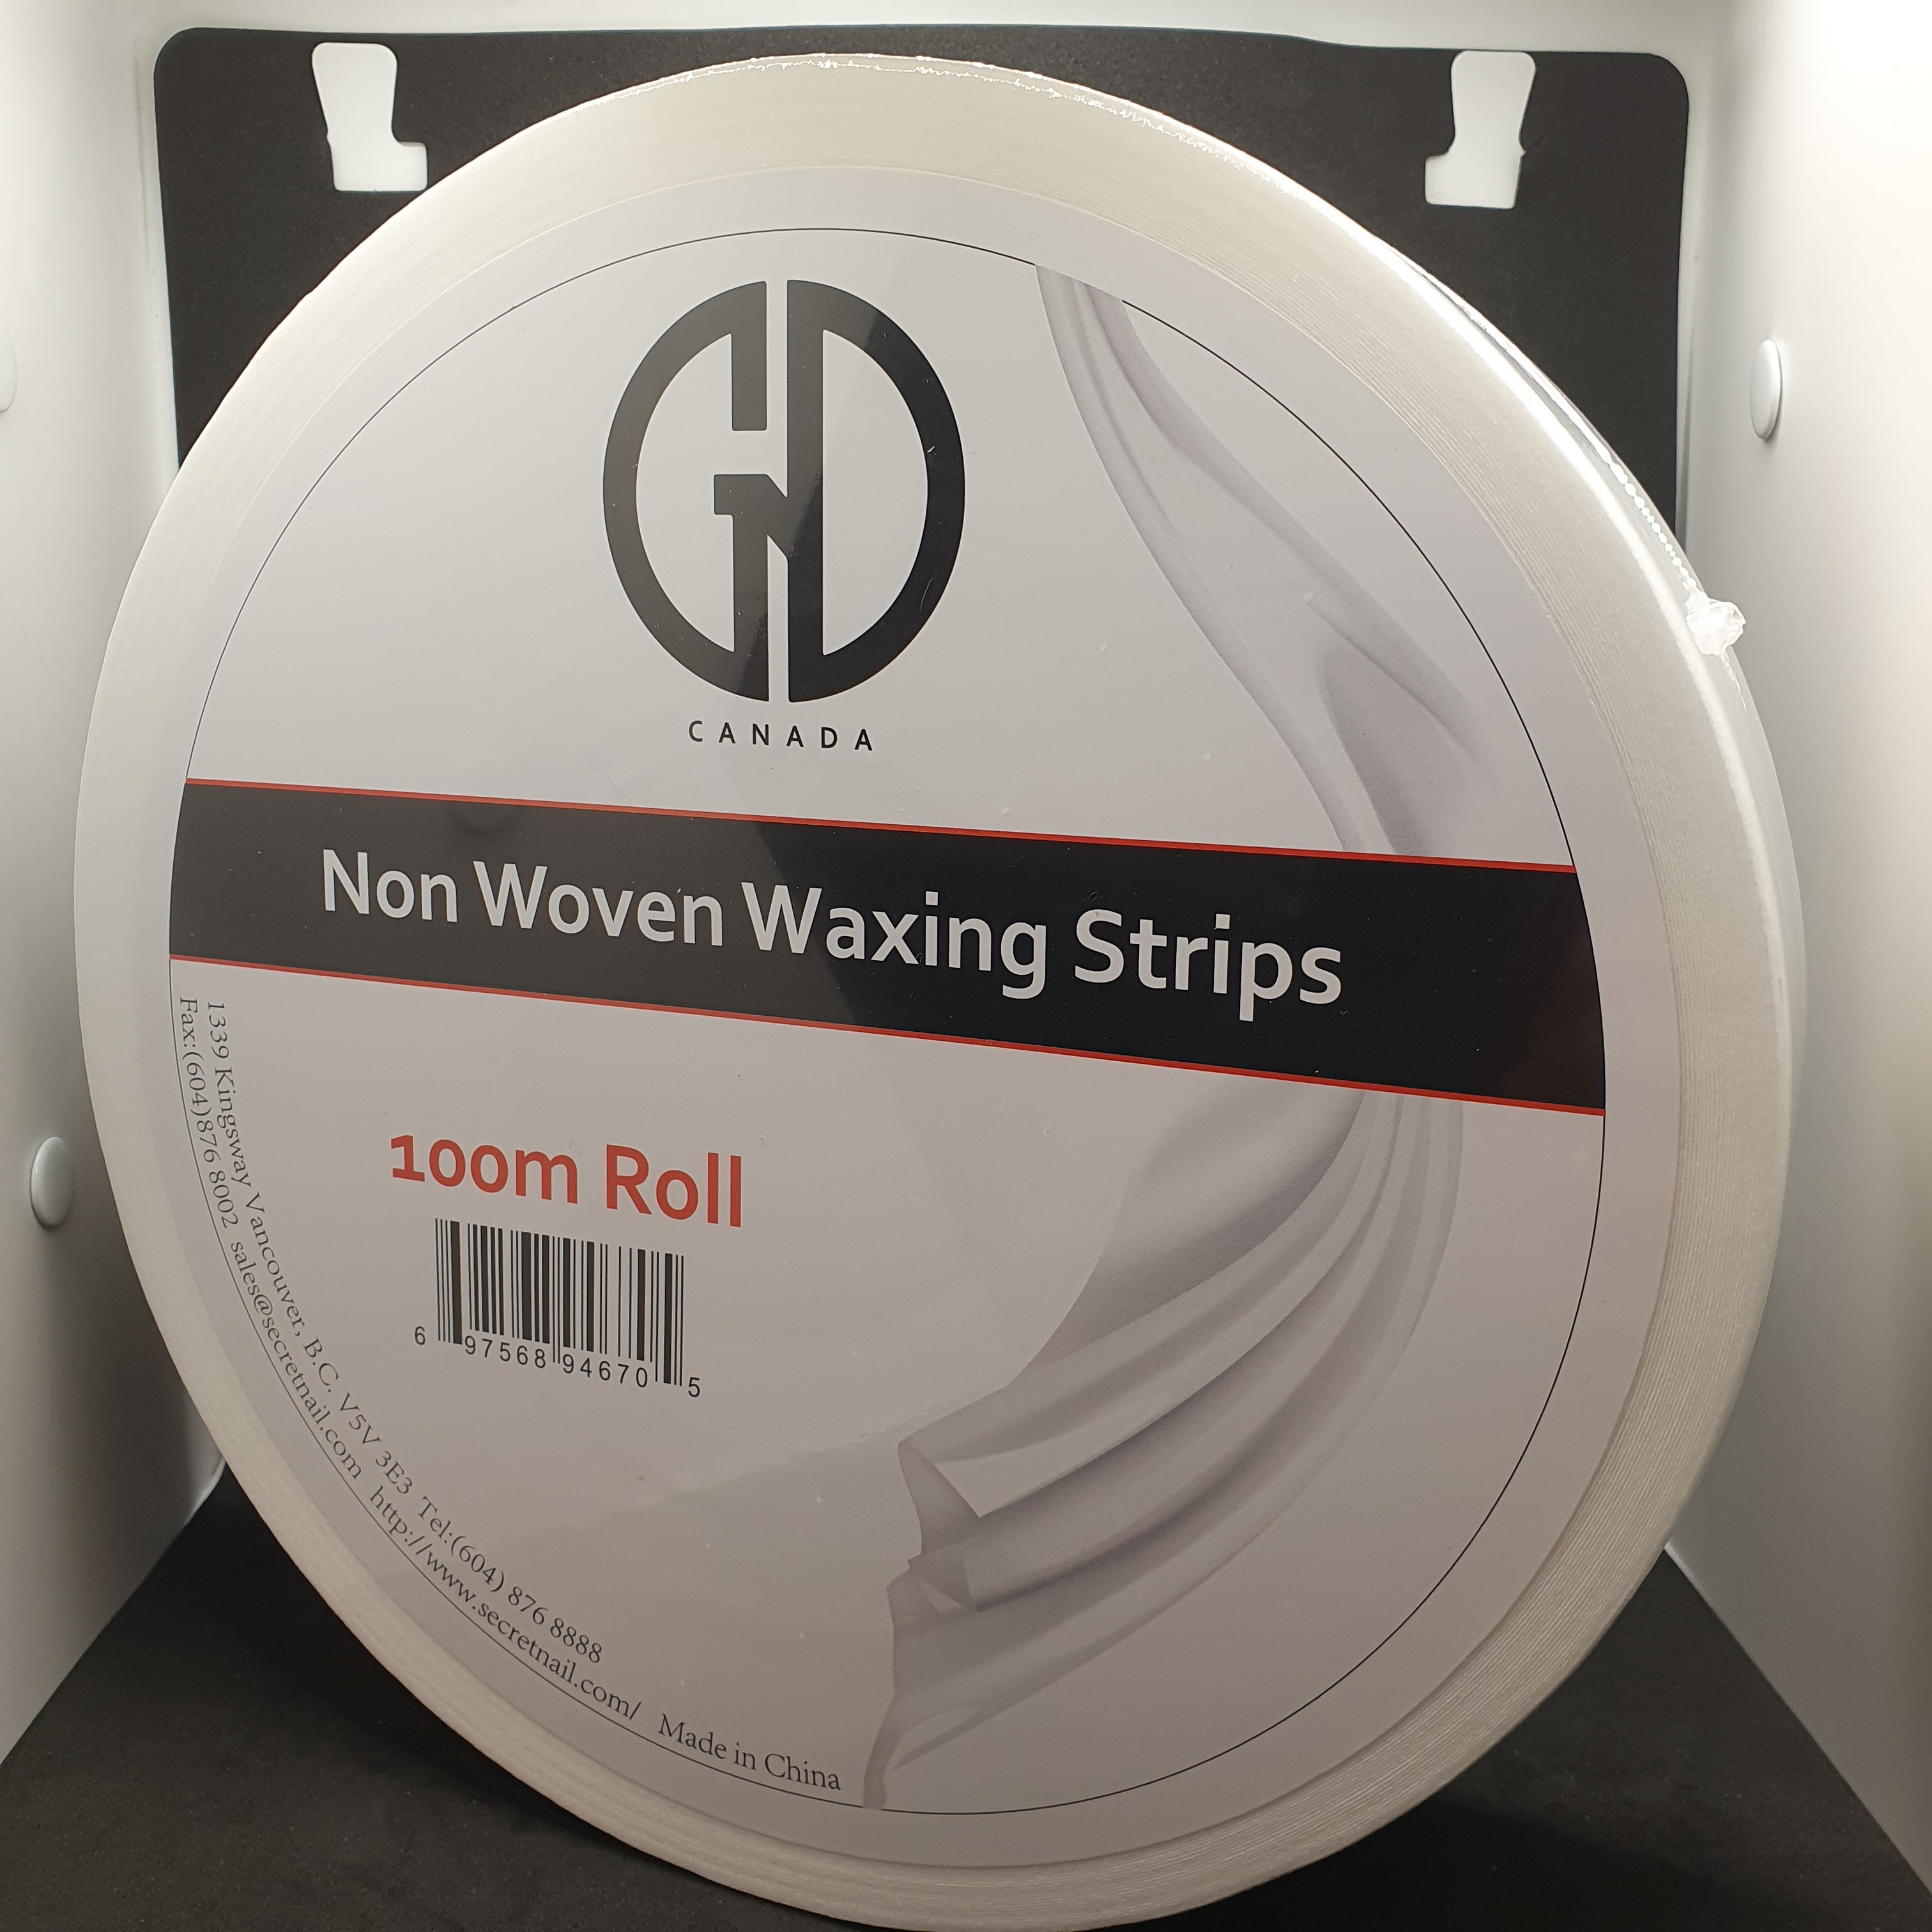 GND NON WOVEN WAXING STRIPS - BUY 5 GET 1 FREE